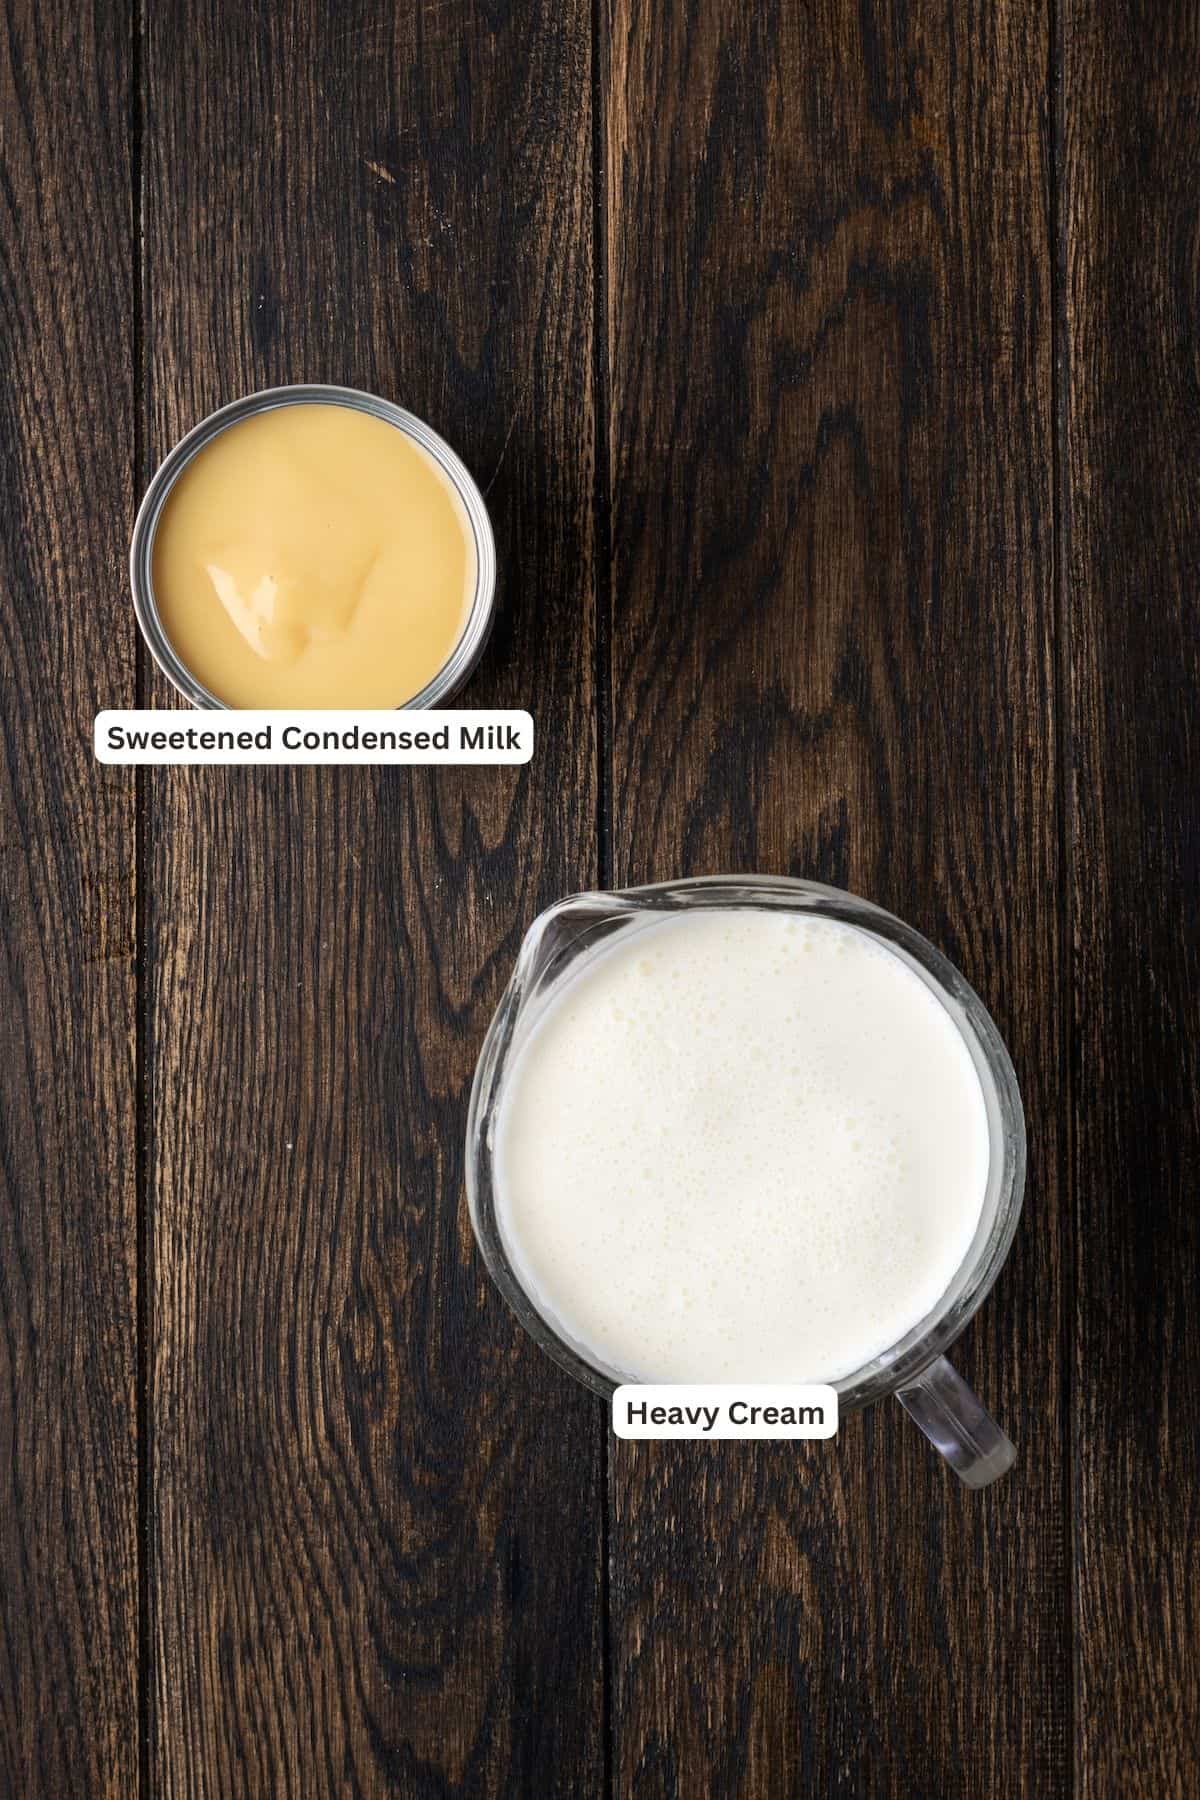 Overhead view of the two ingredients needed to make ice cream, sweetened condensed milk and heavy cream, with text labels overlaying each ingredient.